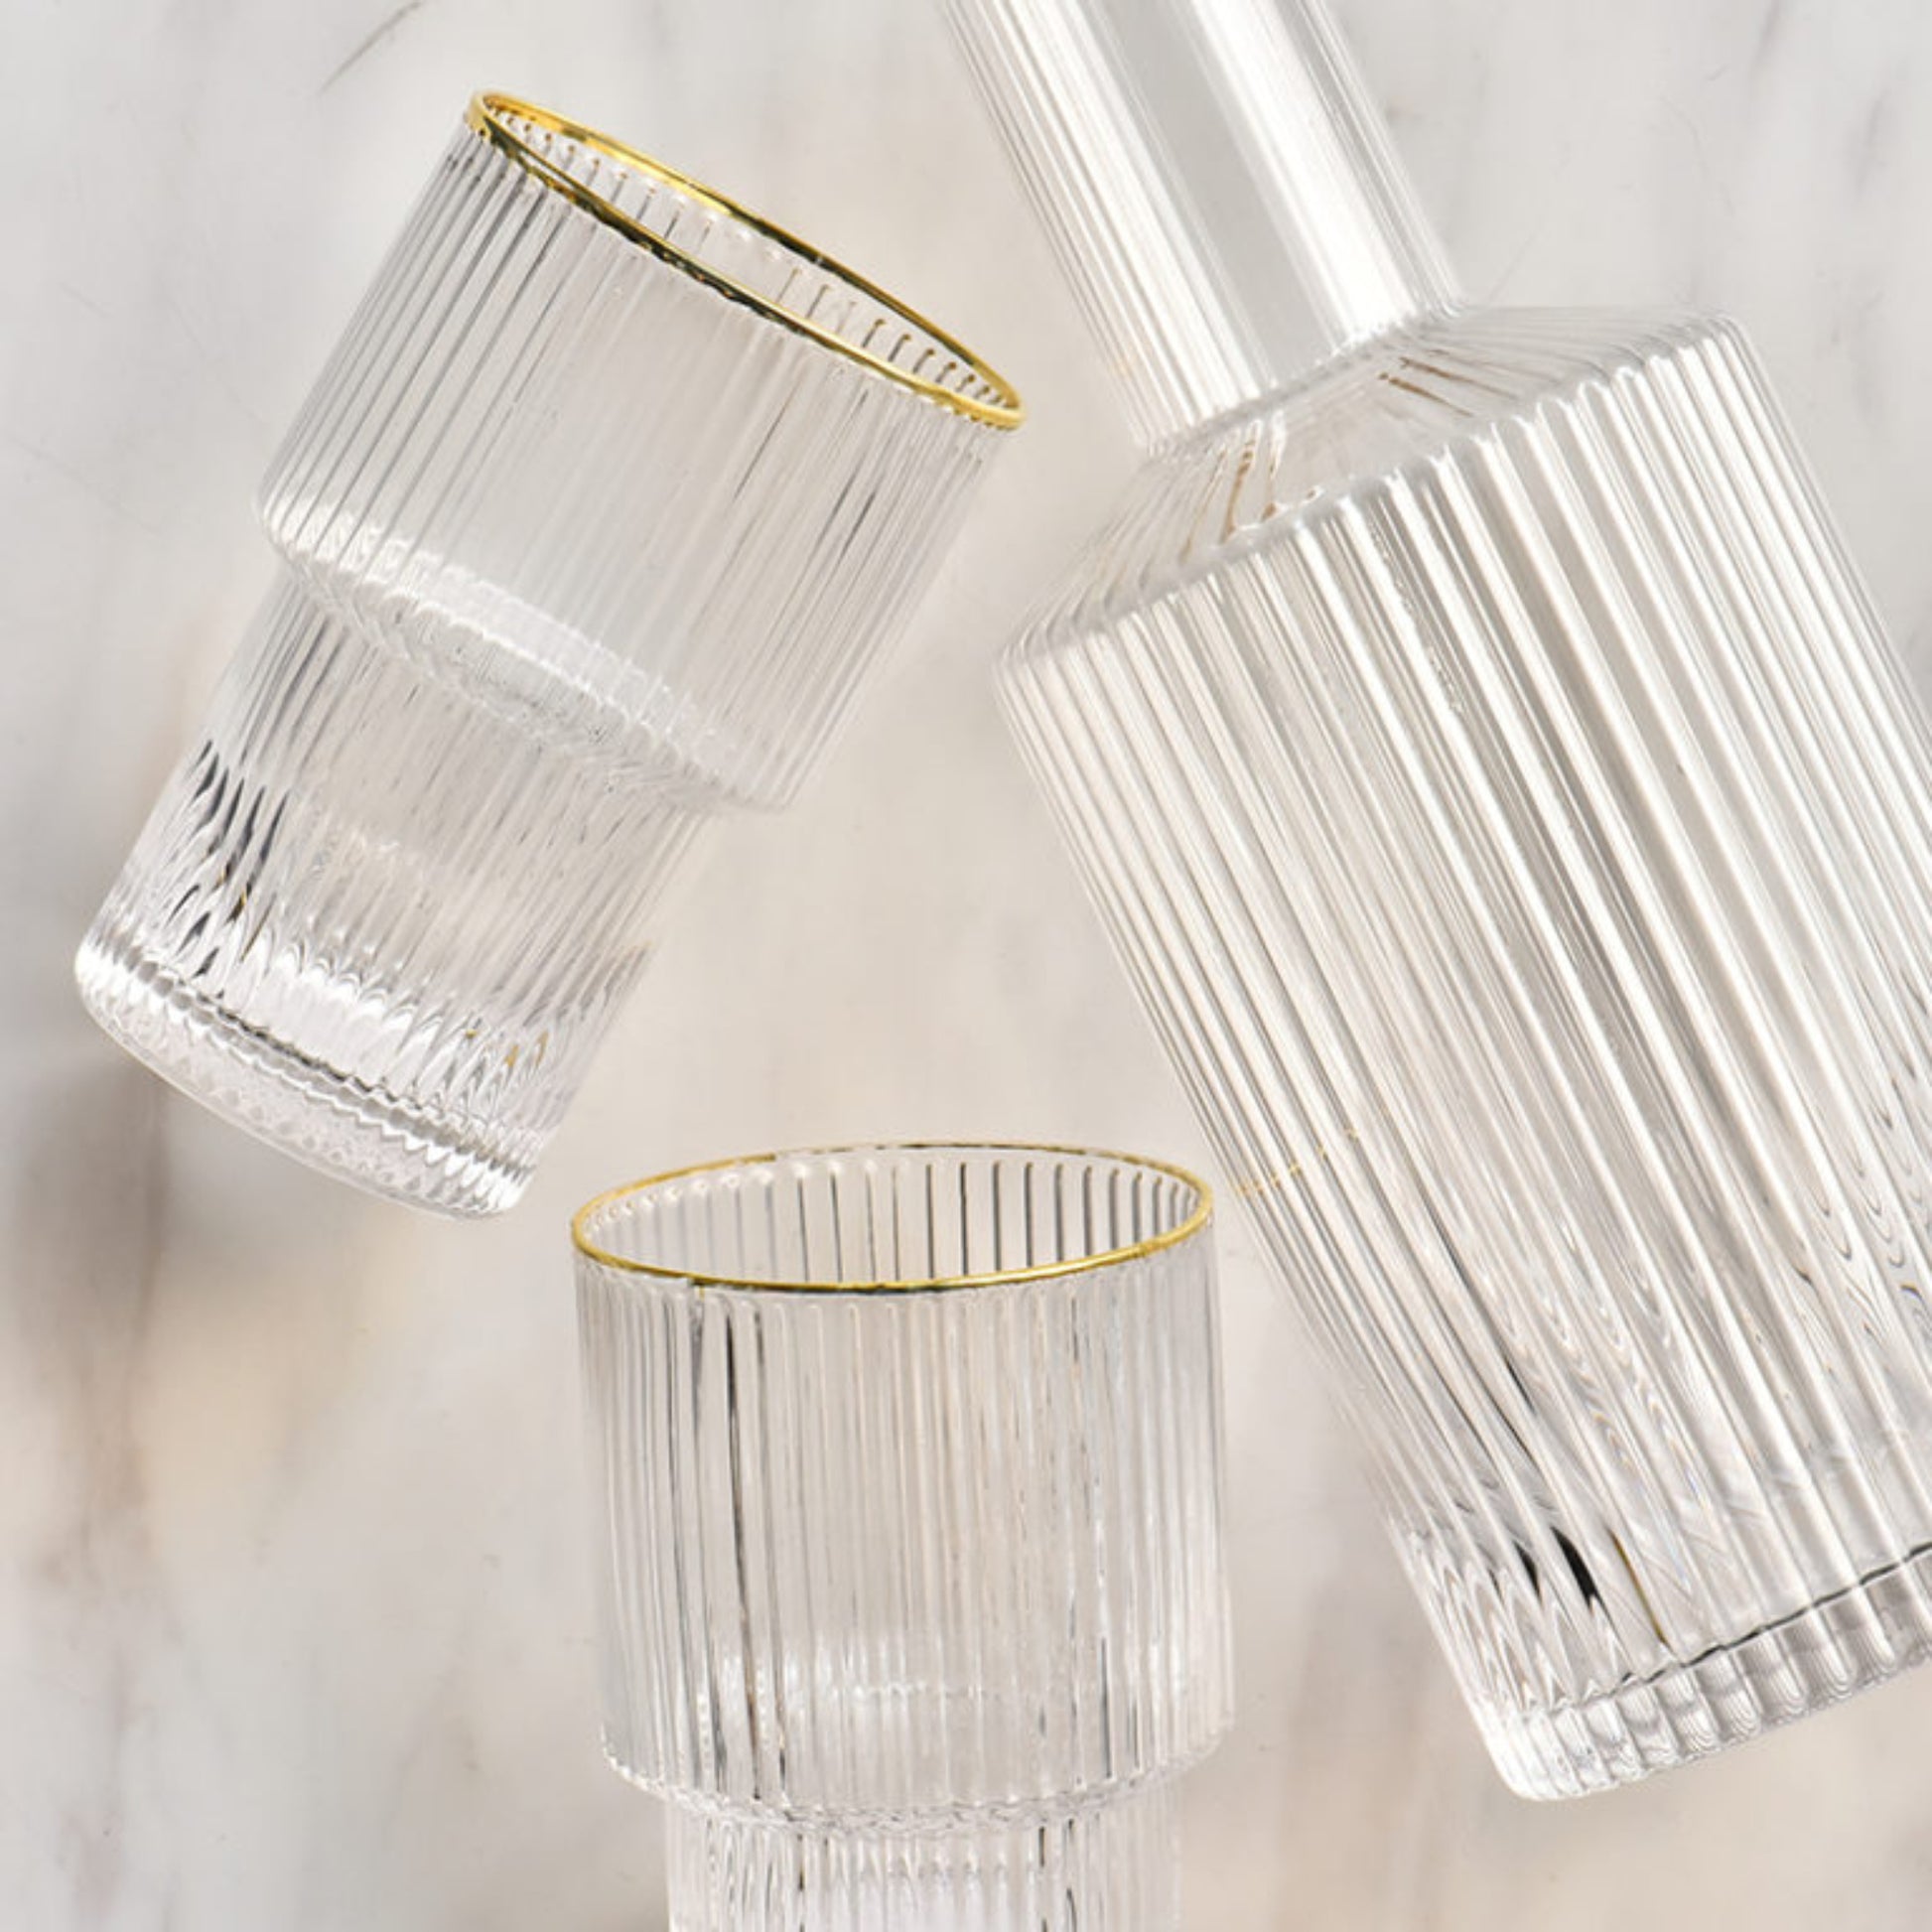 The larger size set of the Izmir gold ripple glass carafe and two glasses on a white table to highlight the gold rim from another view